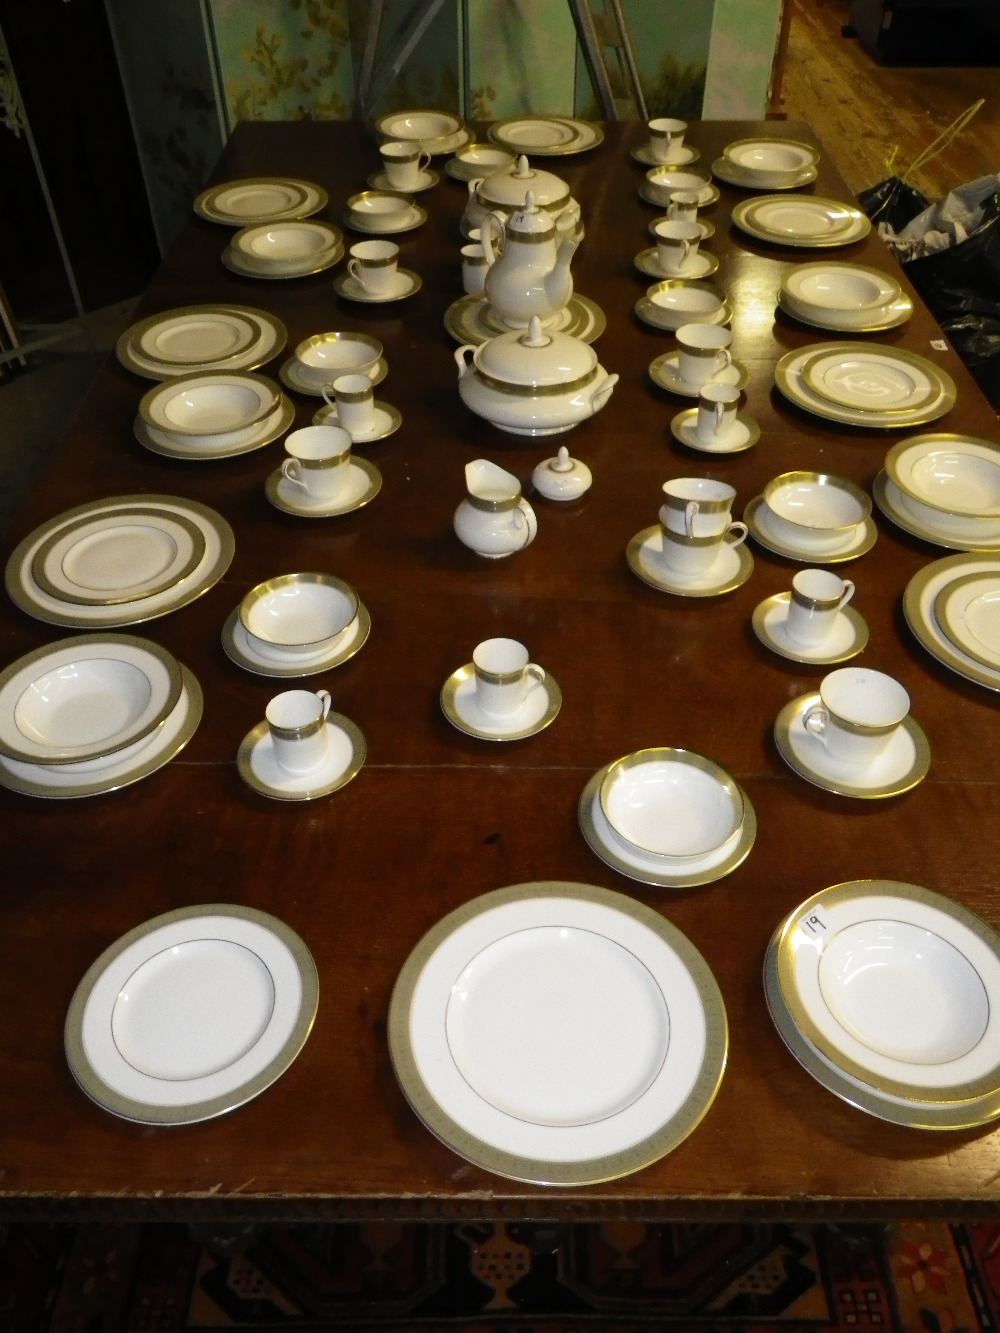 A quantity of Royal Doulton "Belvedere" design dinner, tea and coffee china